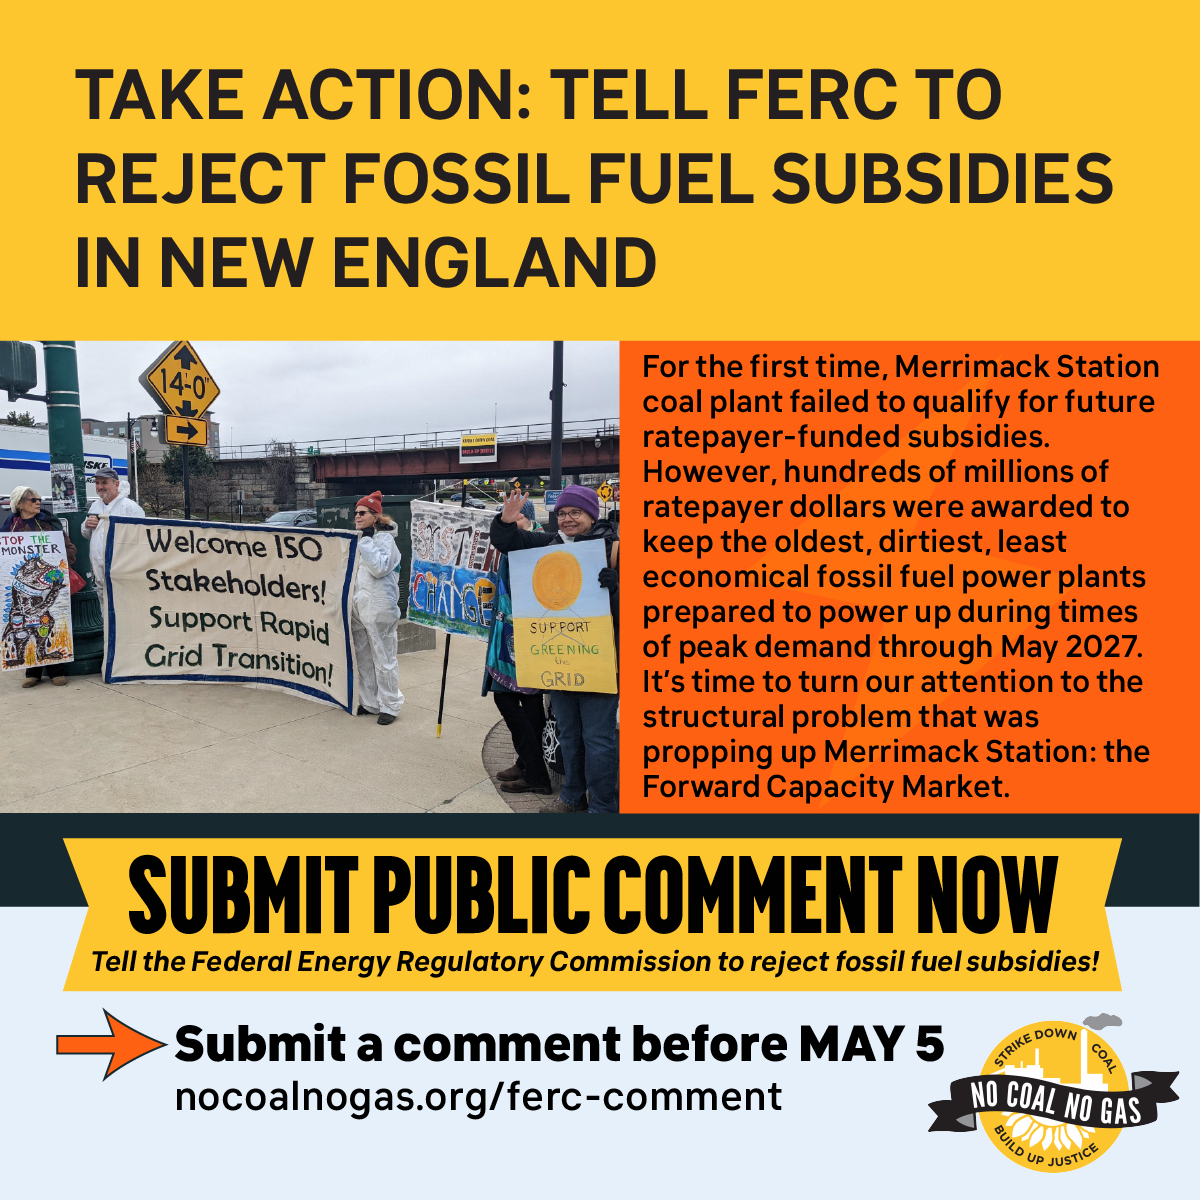 Take Action! Tell FERC to reject fossil fuels and clean up the New England Grid